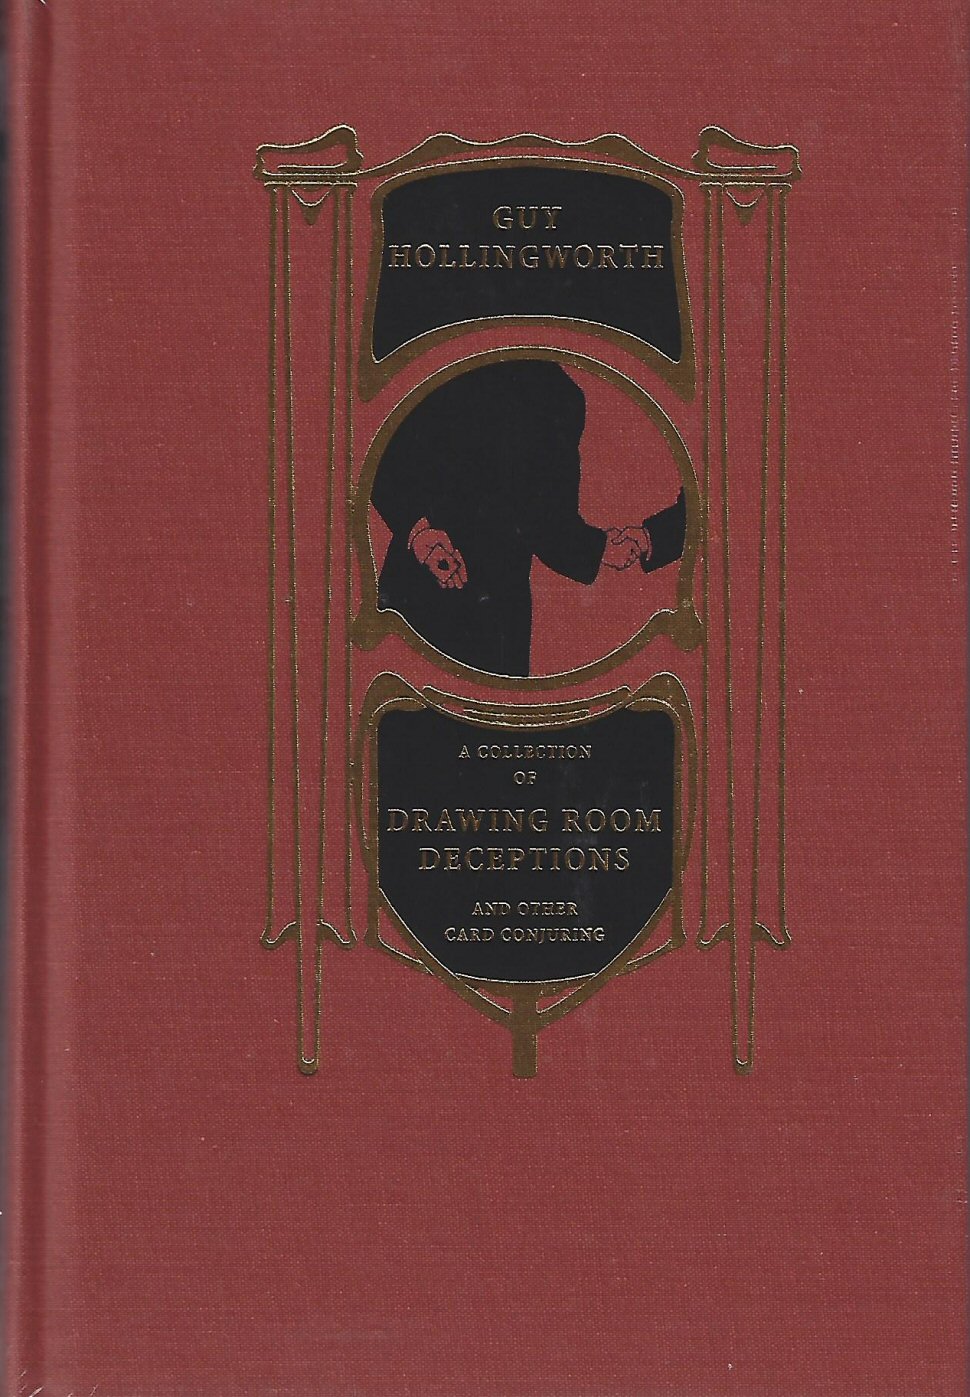 Drawing Room Deceptions by Hollingworth Book 